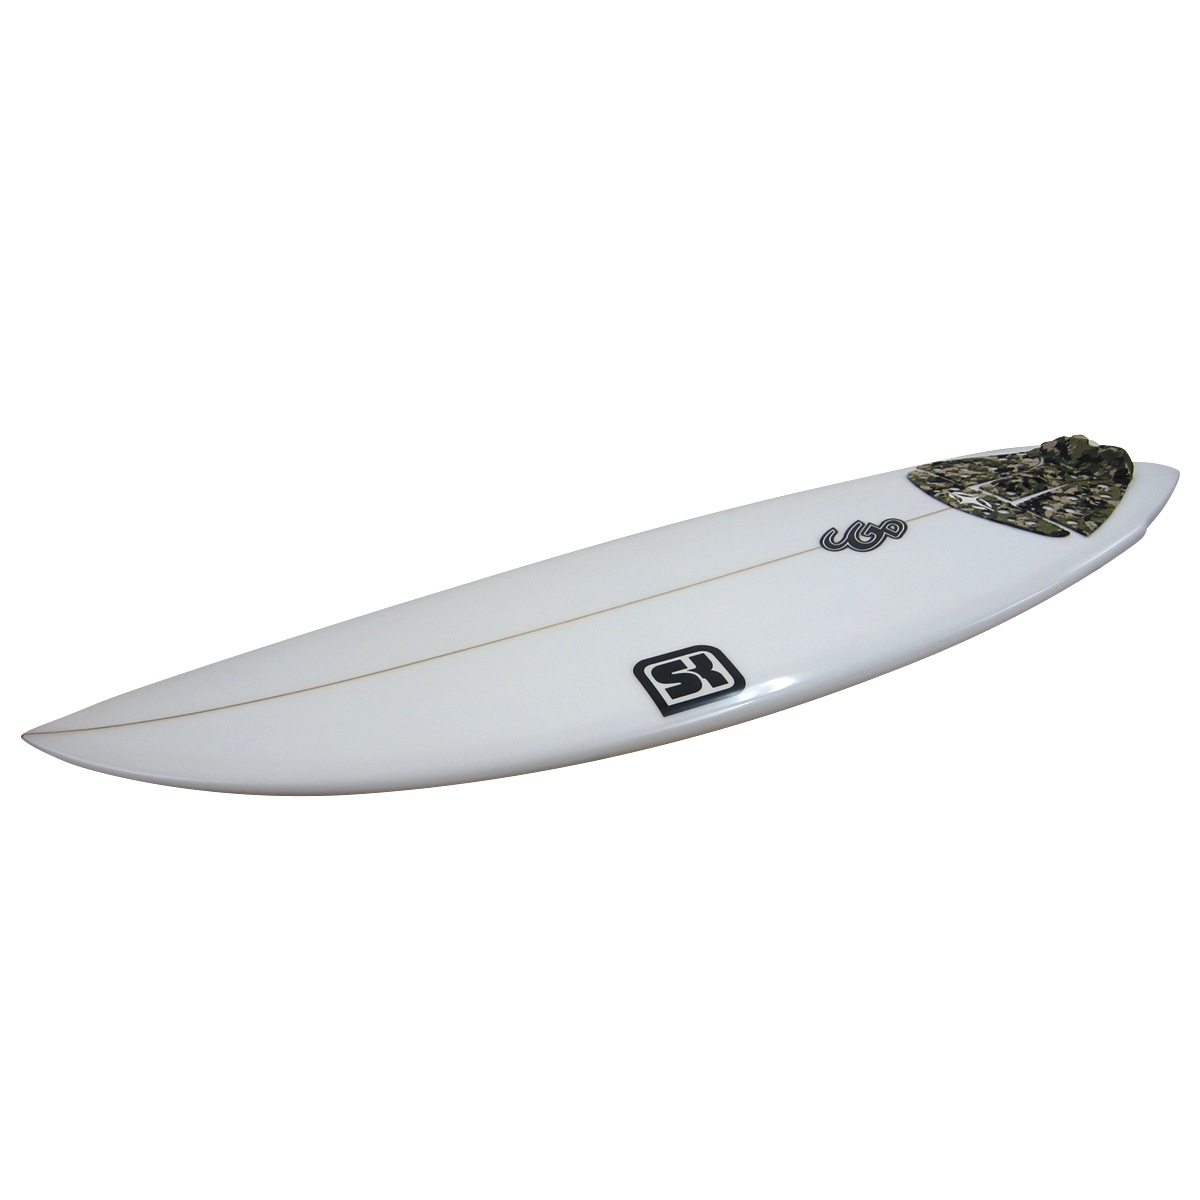 SK SURFBOARDS / SCRAPPER 5`6 Shaped By Chris Gallagher